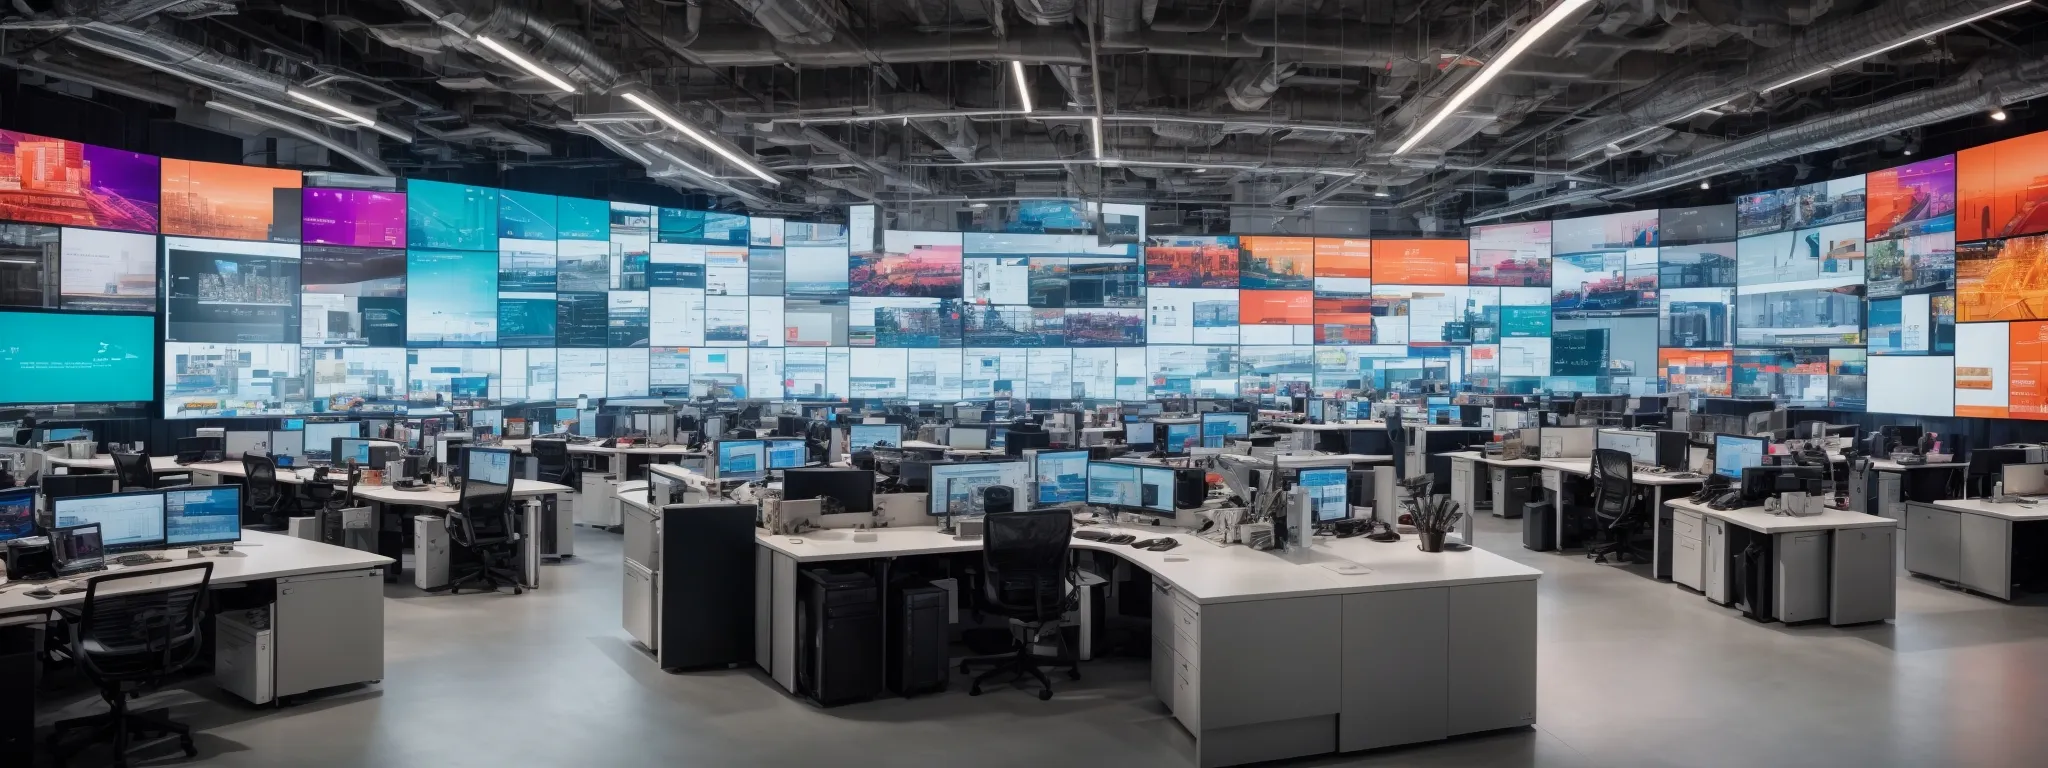 a wide-angle view of a modern open-plan office with multiple digital screens displaying colorful analytics and graphs.